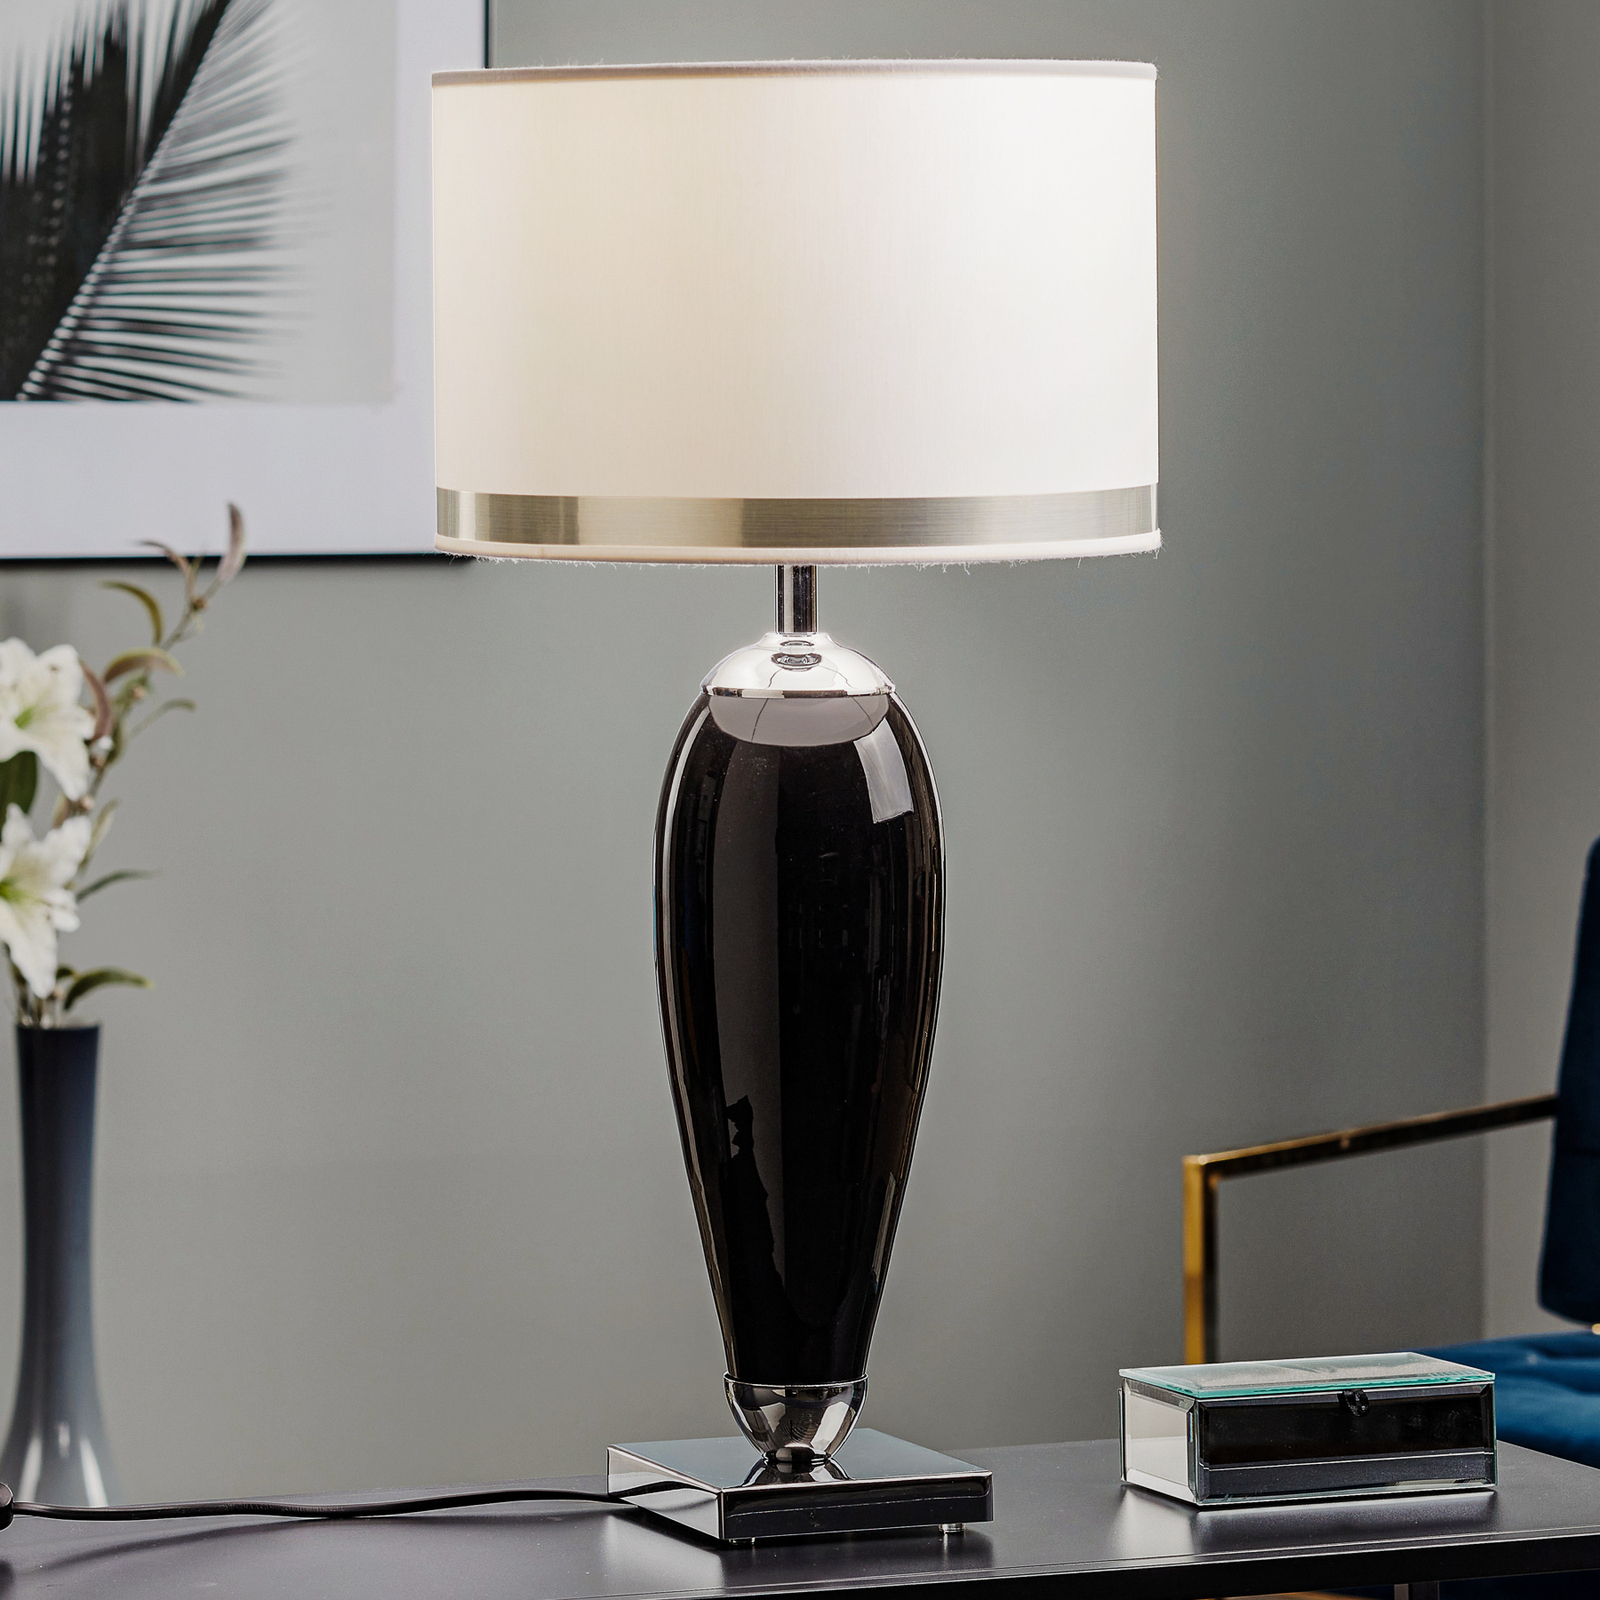 Lund table lamp in white and black, height 60 cm